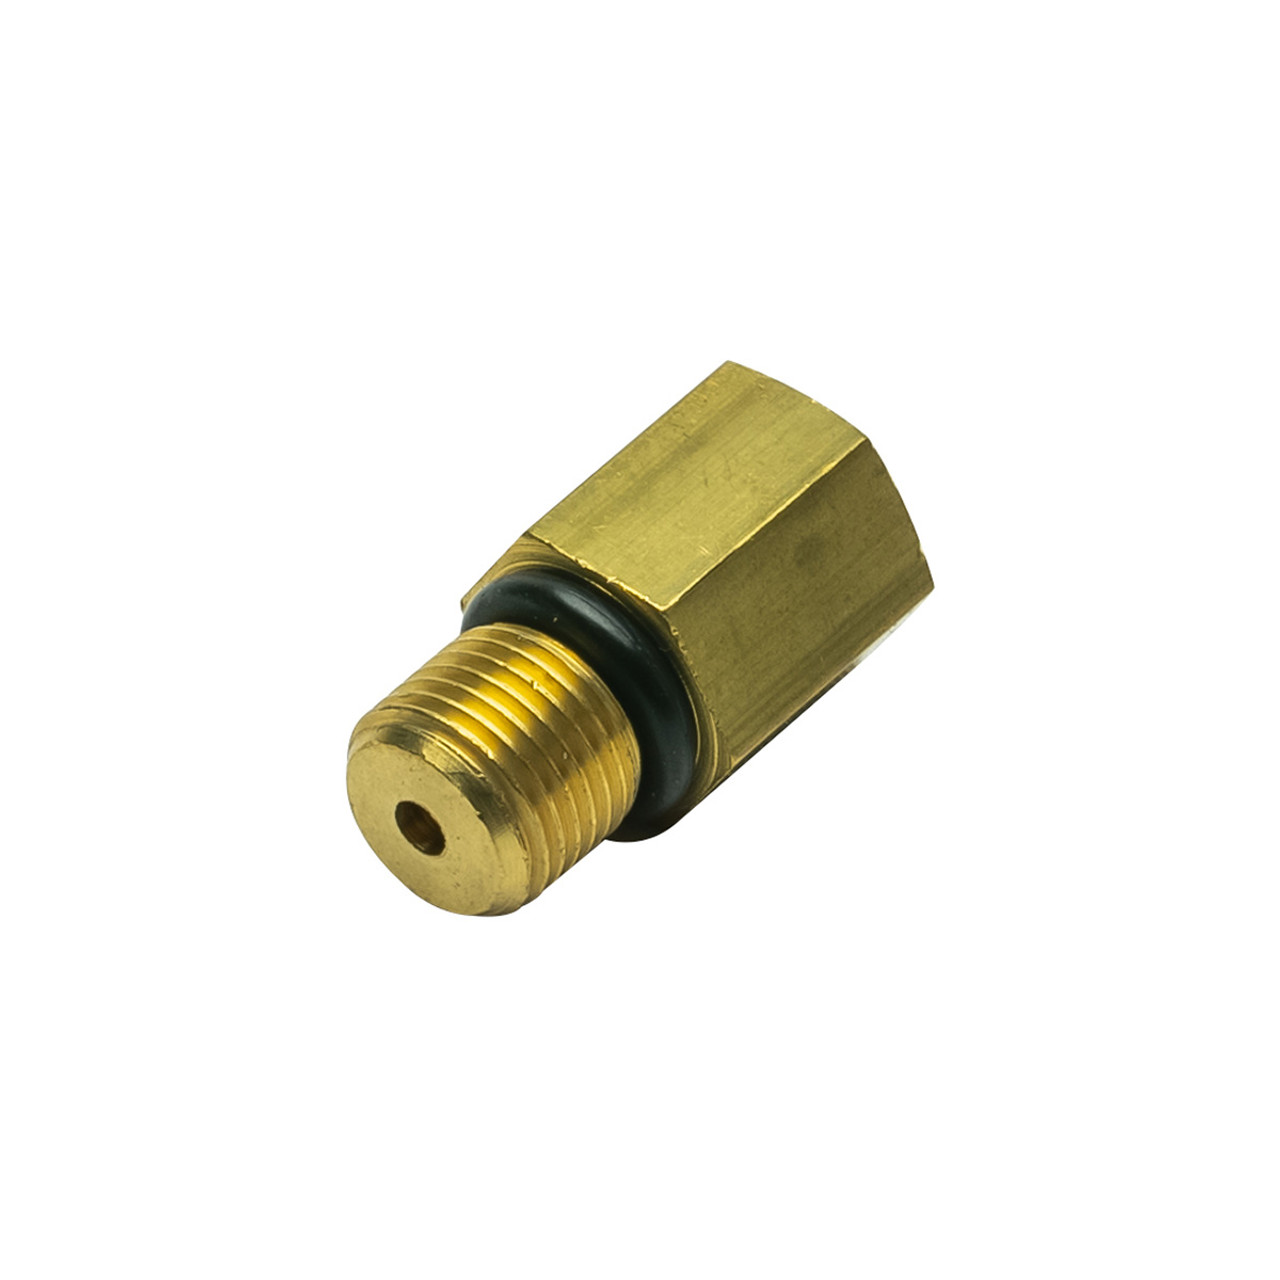 1/8 BSPP Male to 1/8-27 NPT Female Thread Adapter